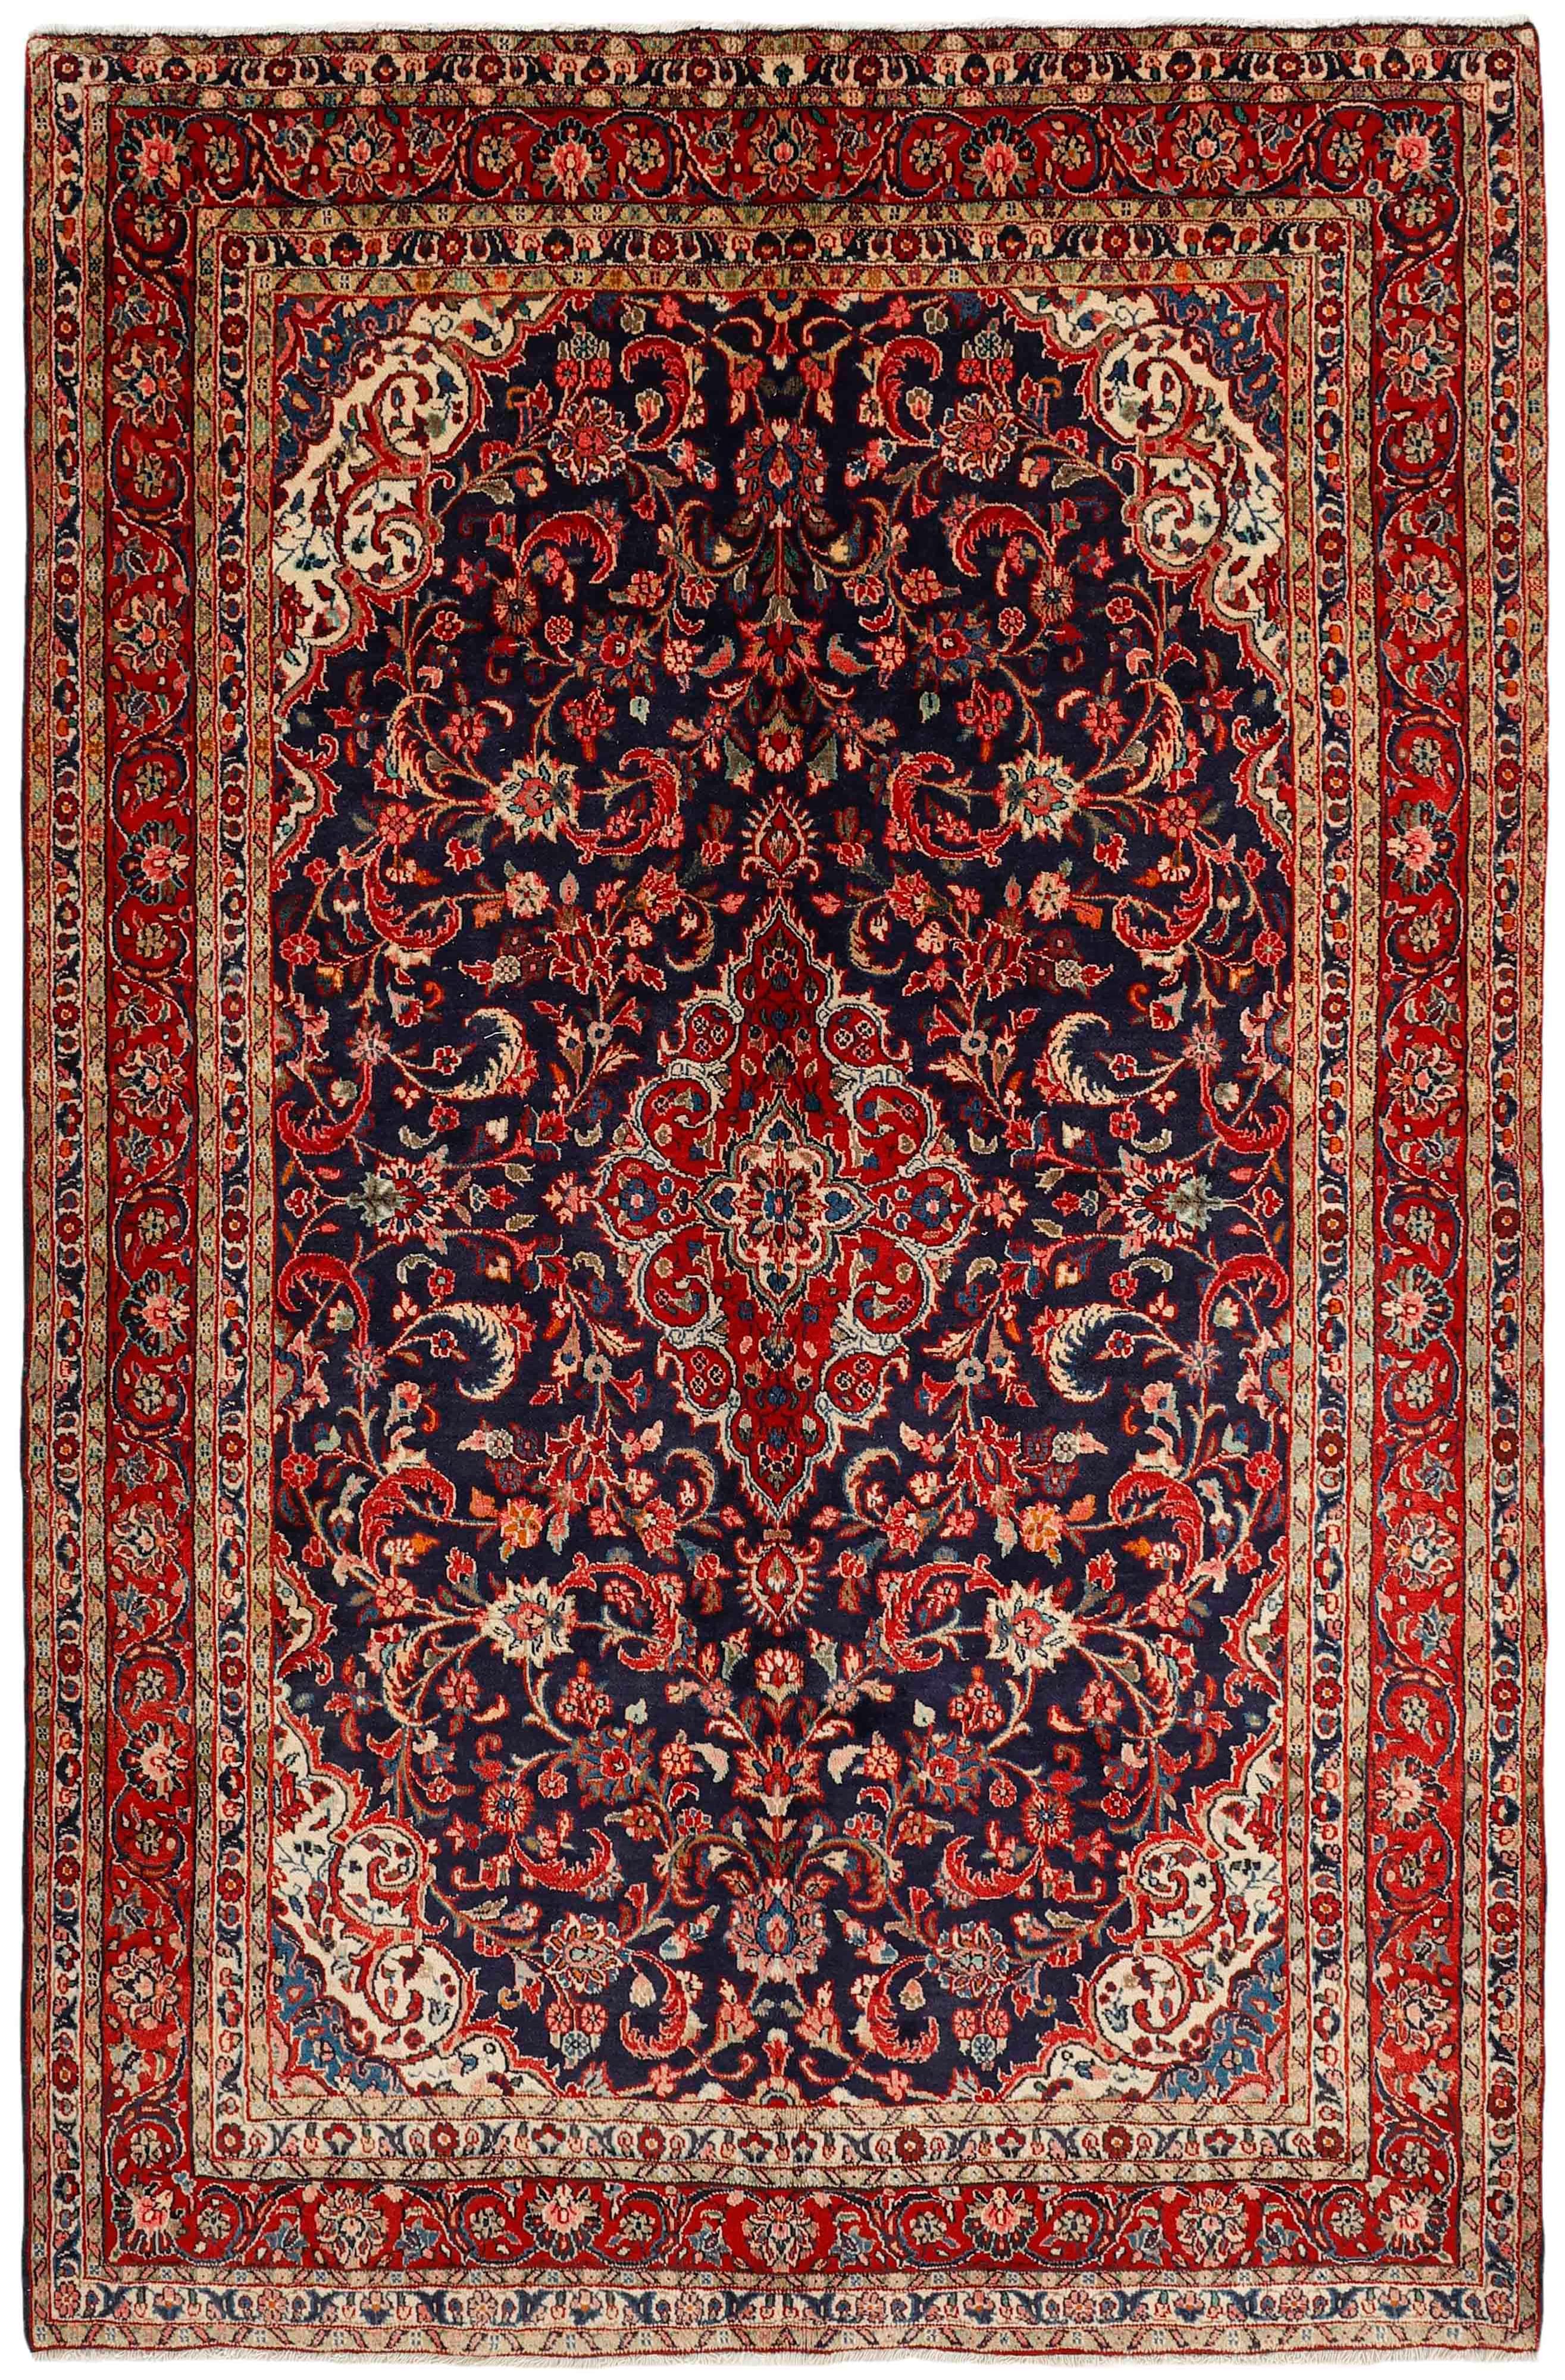 Large Persian rug with traditional floral pattern in red and black